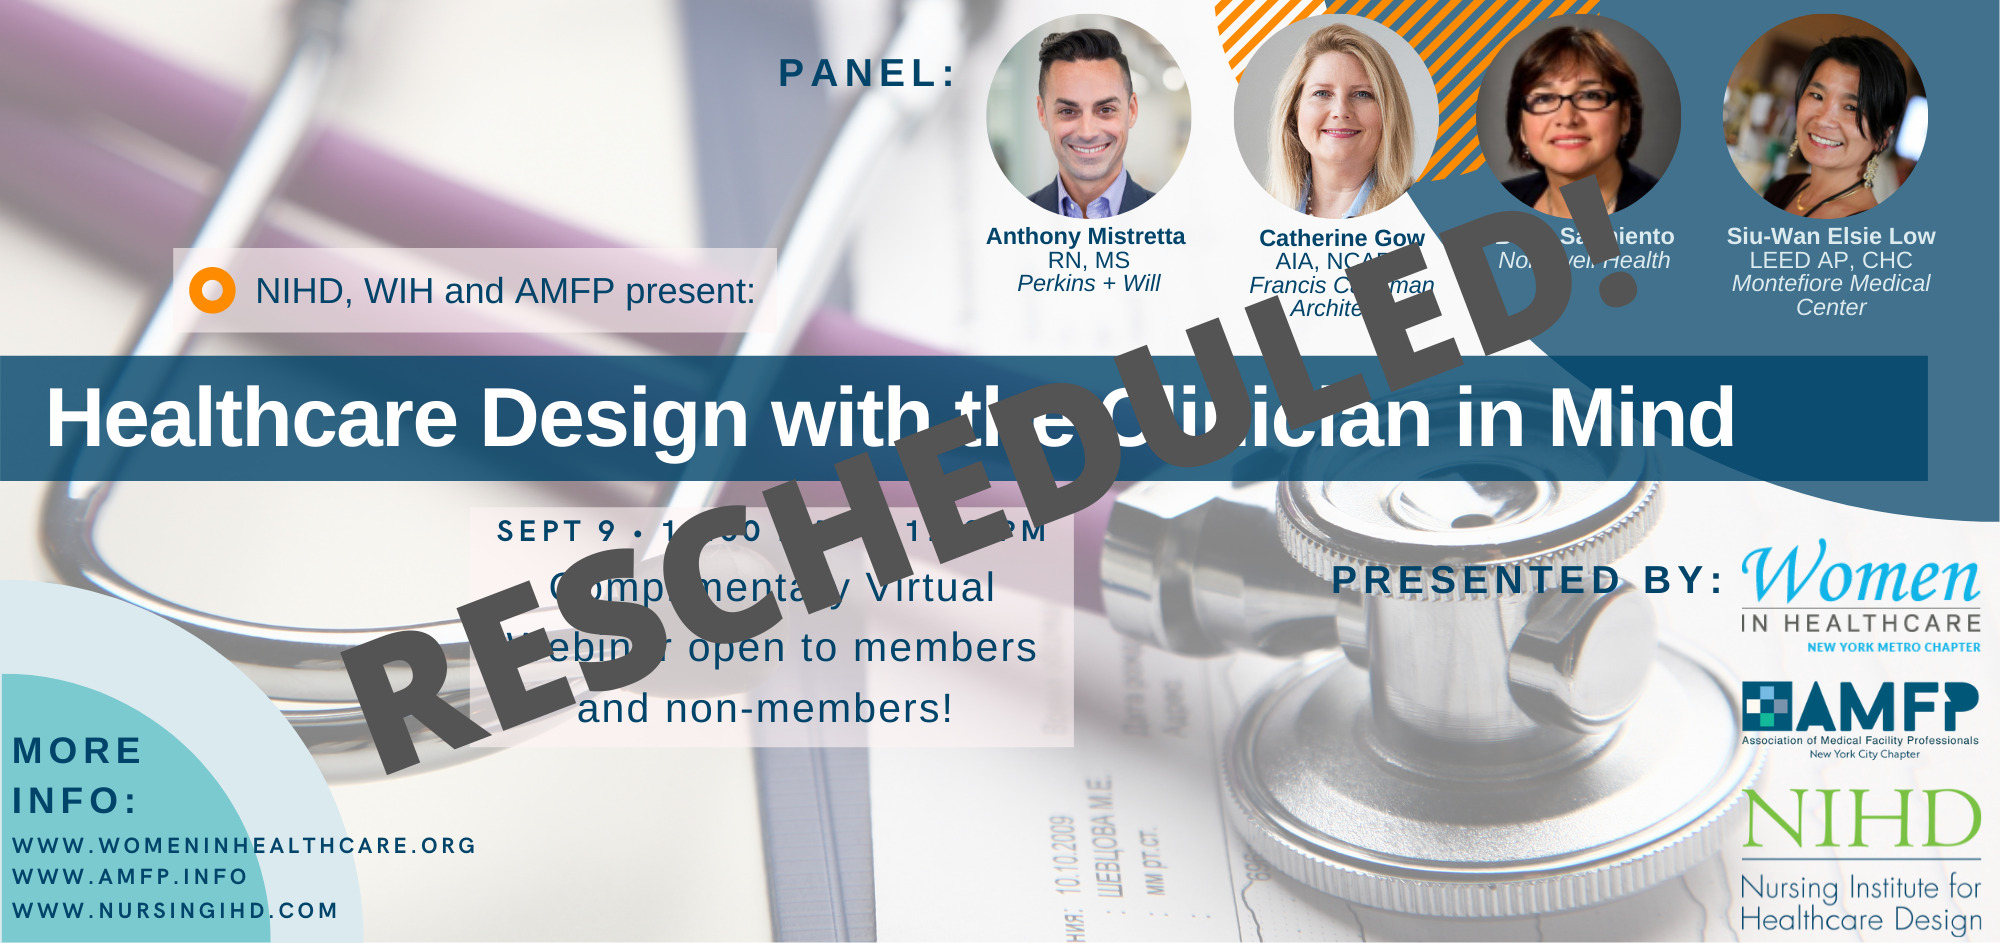 WIH, AMFP & NIHD Present: Healthcare Design with the Clinician in Mind Virtual Event